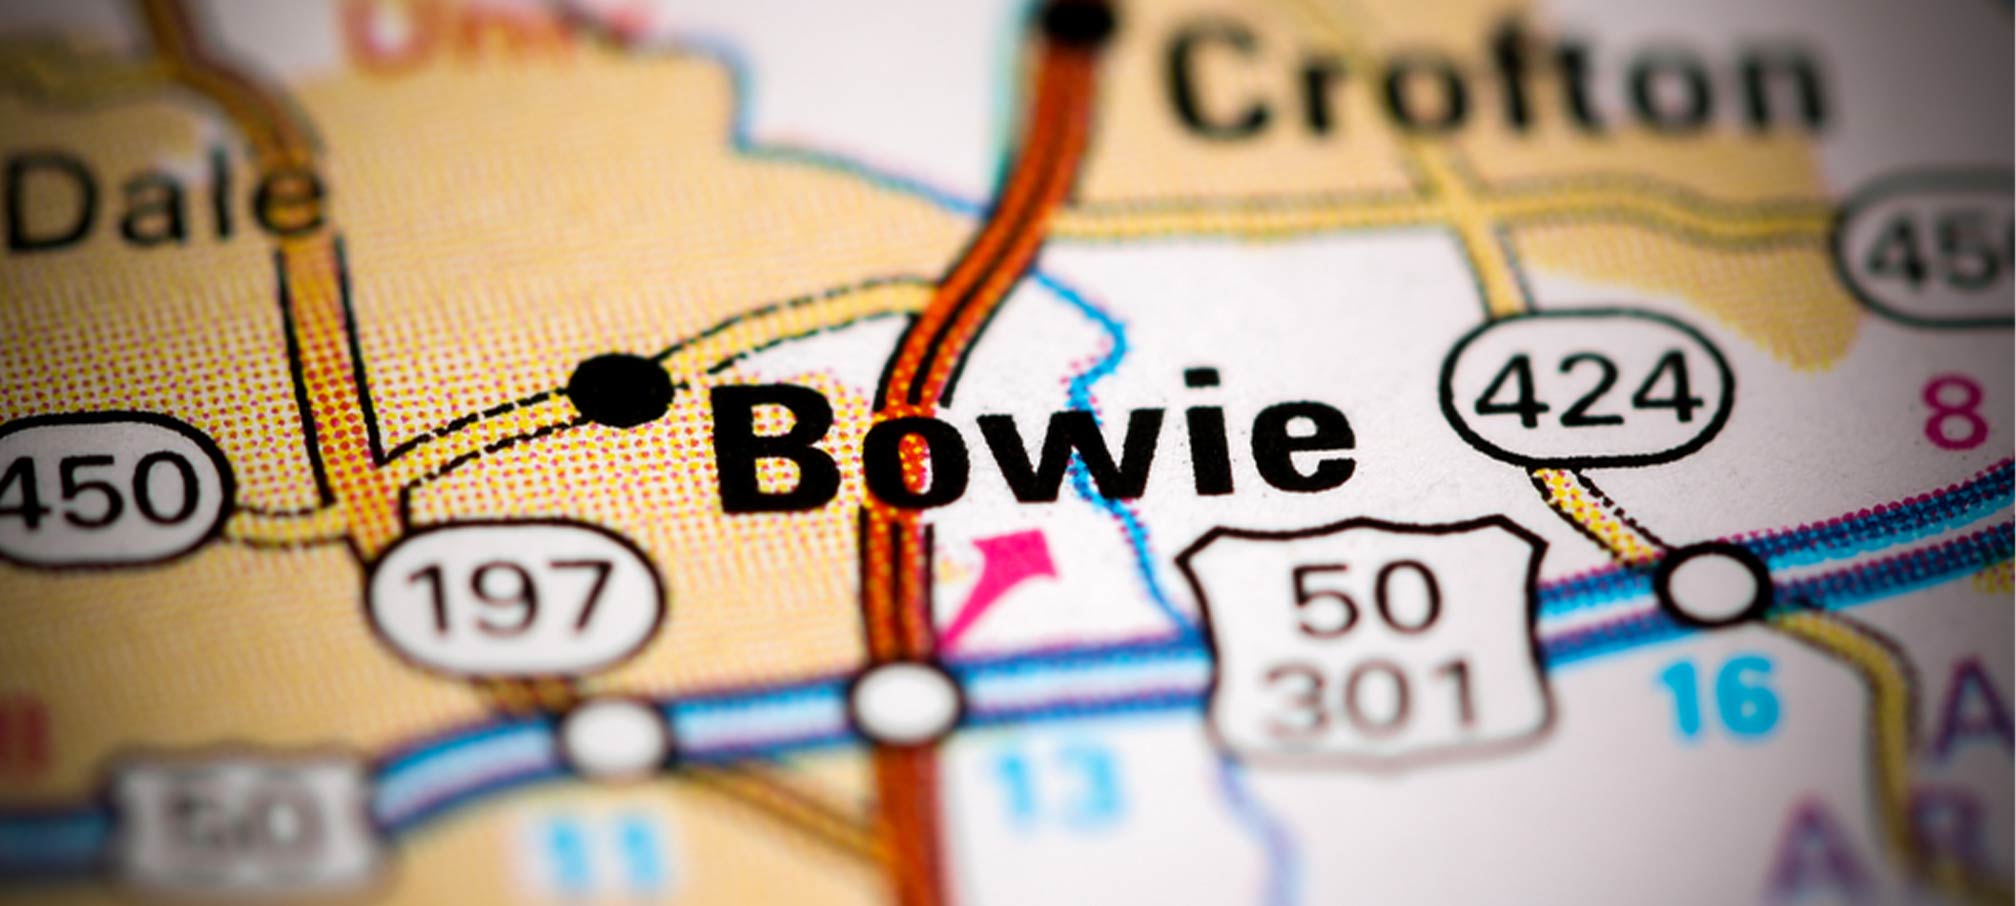 bowie car accident lawyer